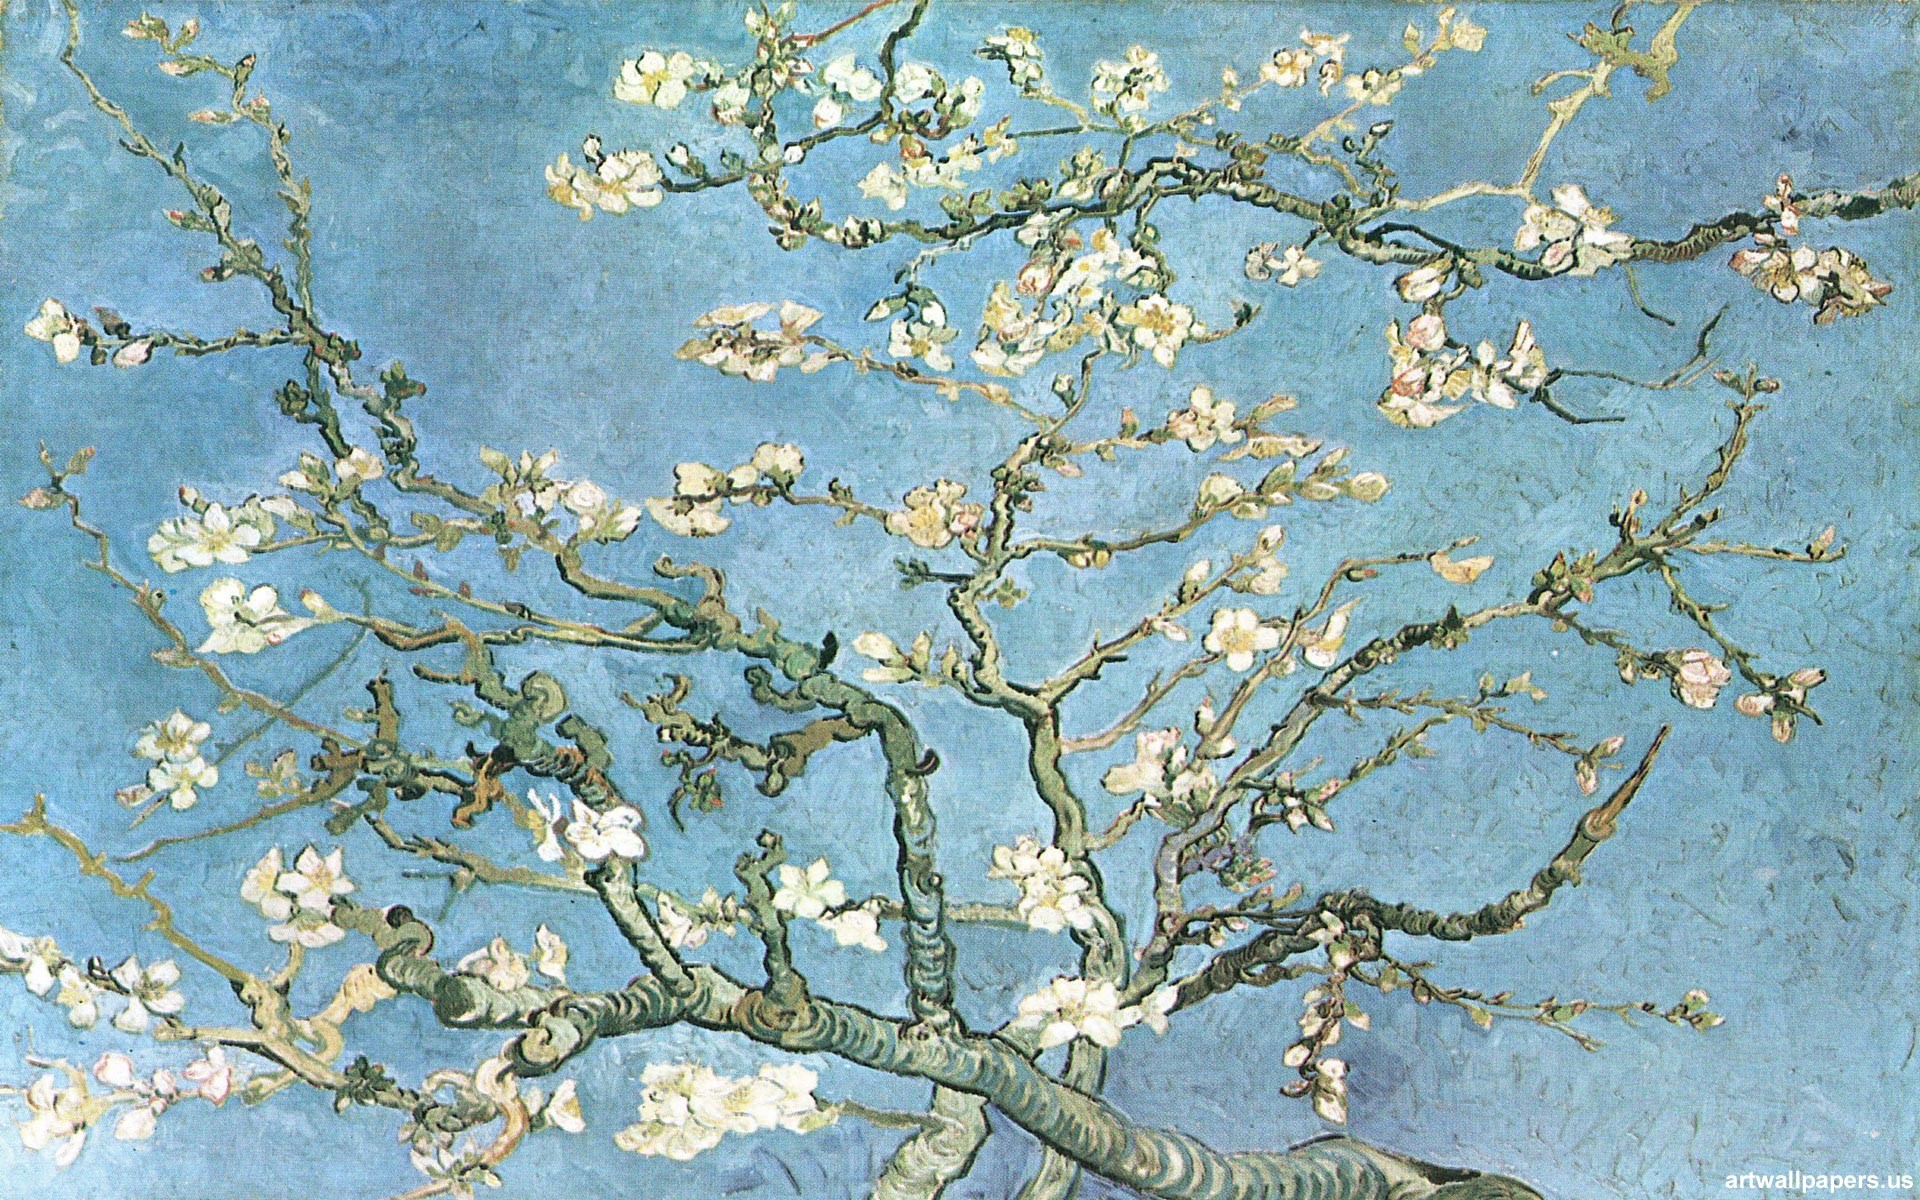 1920x1200 Almond Branches in Bloom, San Remy Wallpaper, c.1890 Vincent van Gogh